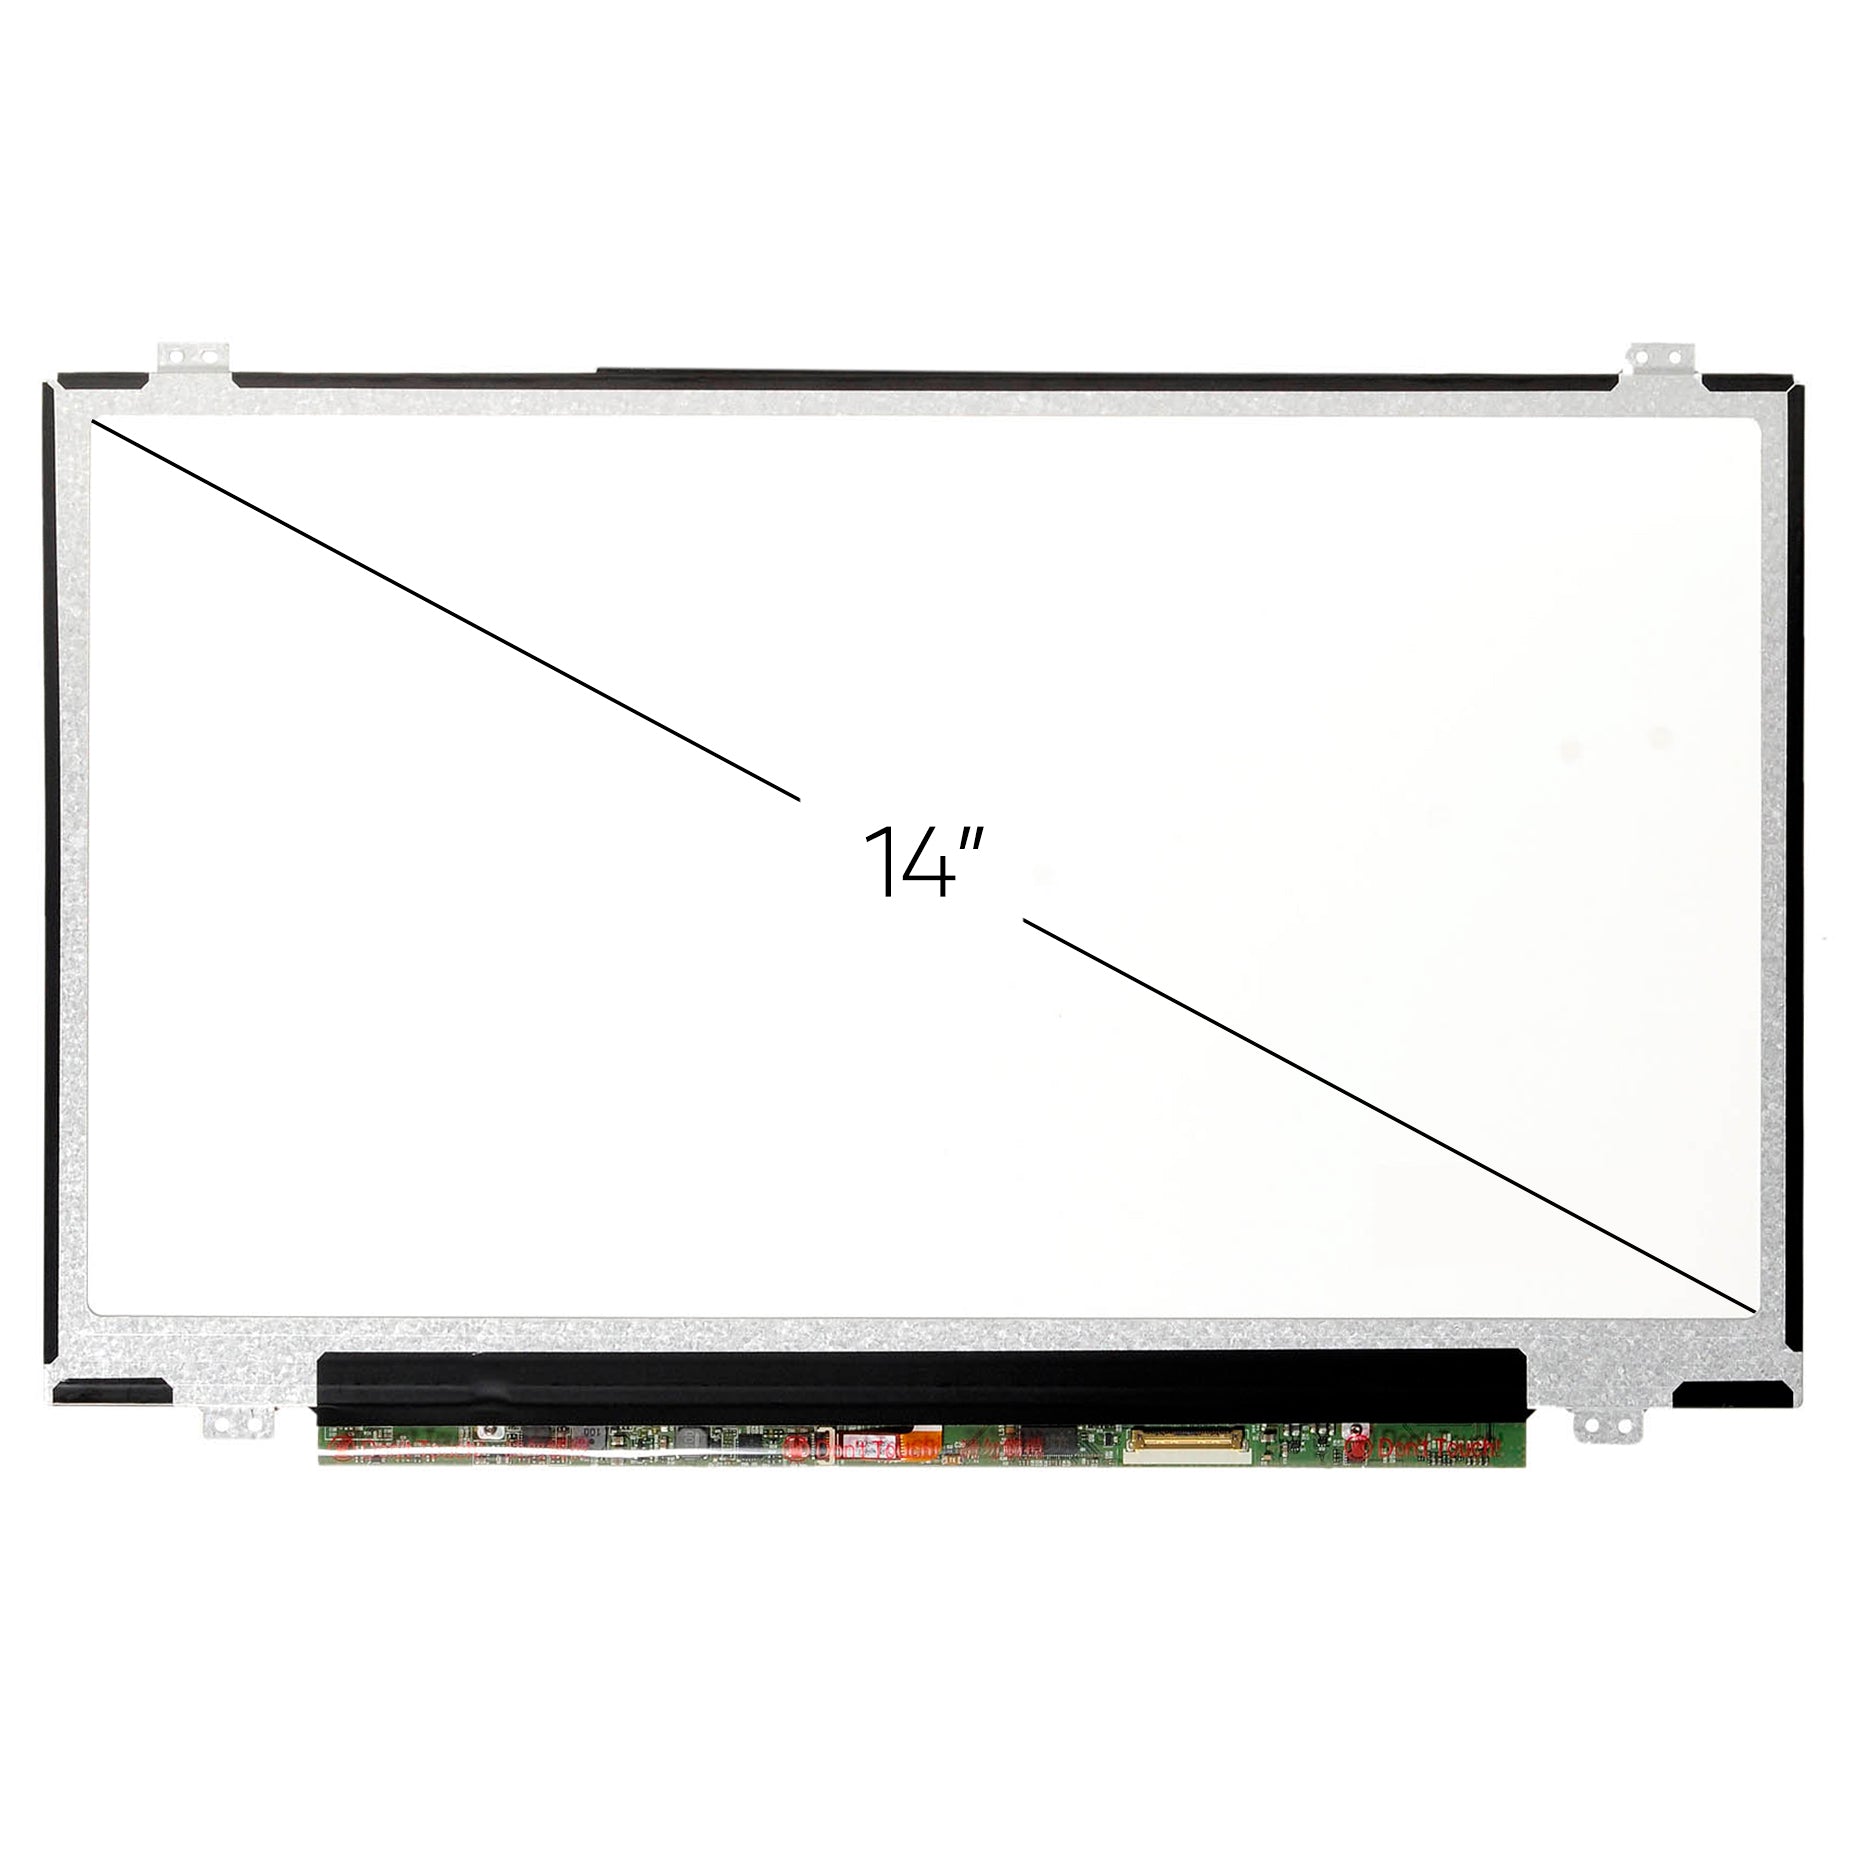 Screen Replacement for Lenovo Thinkpad E450 FHD 1920x1080 IPS Matte LCD LED Display